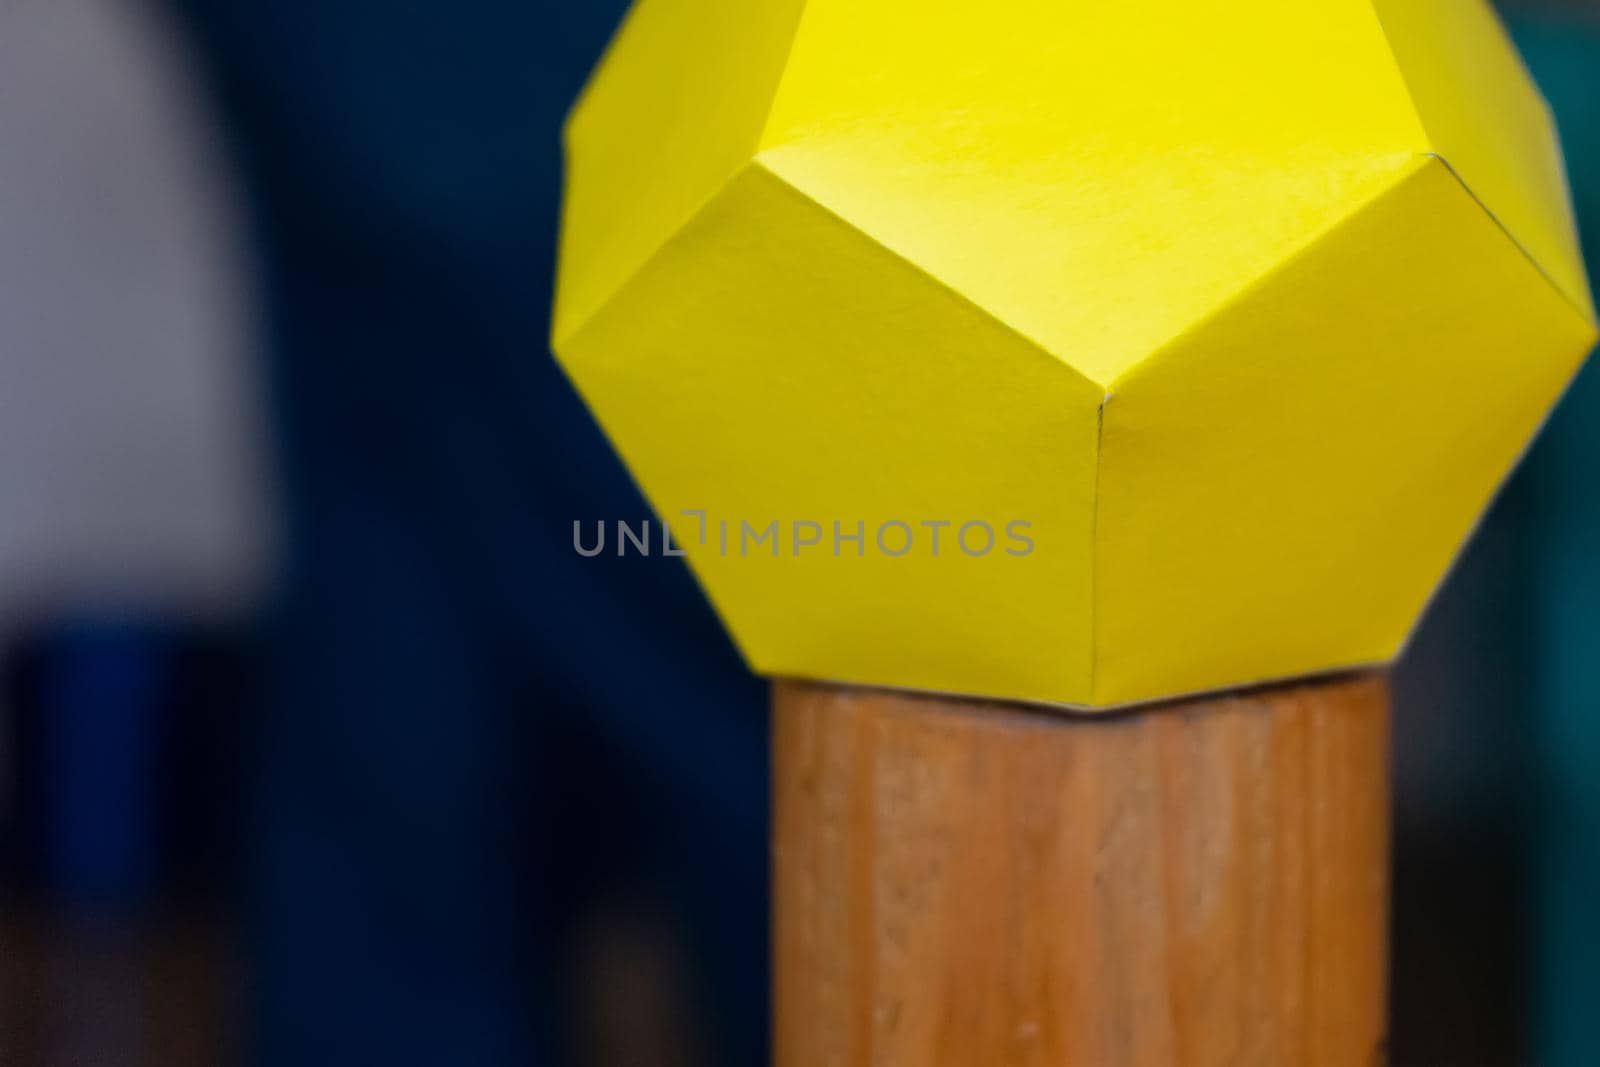 The multifaceted yellow figure is made of many yellow paper pentagons on a wooden stand. Selective focus